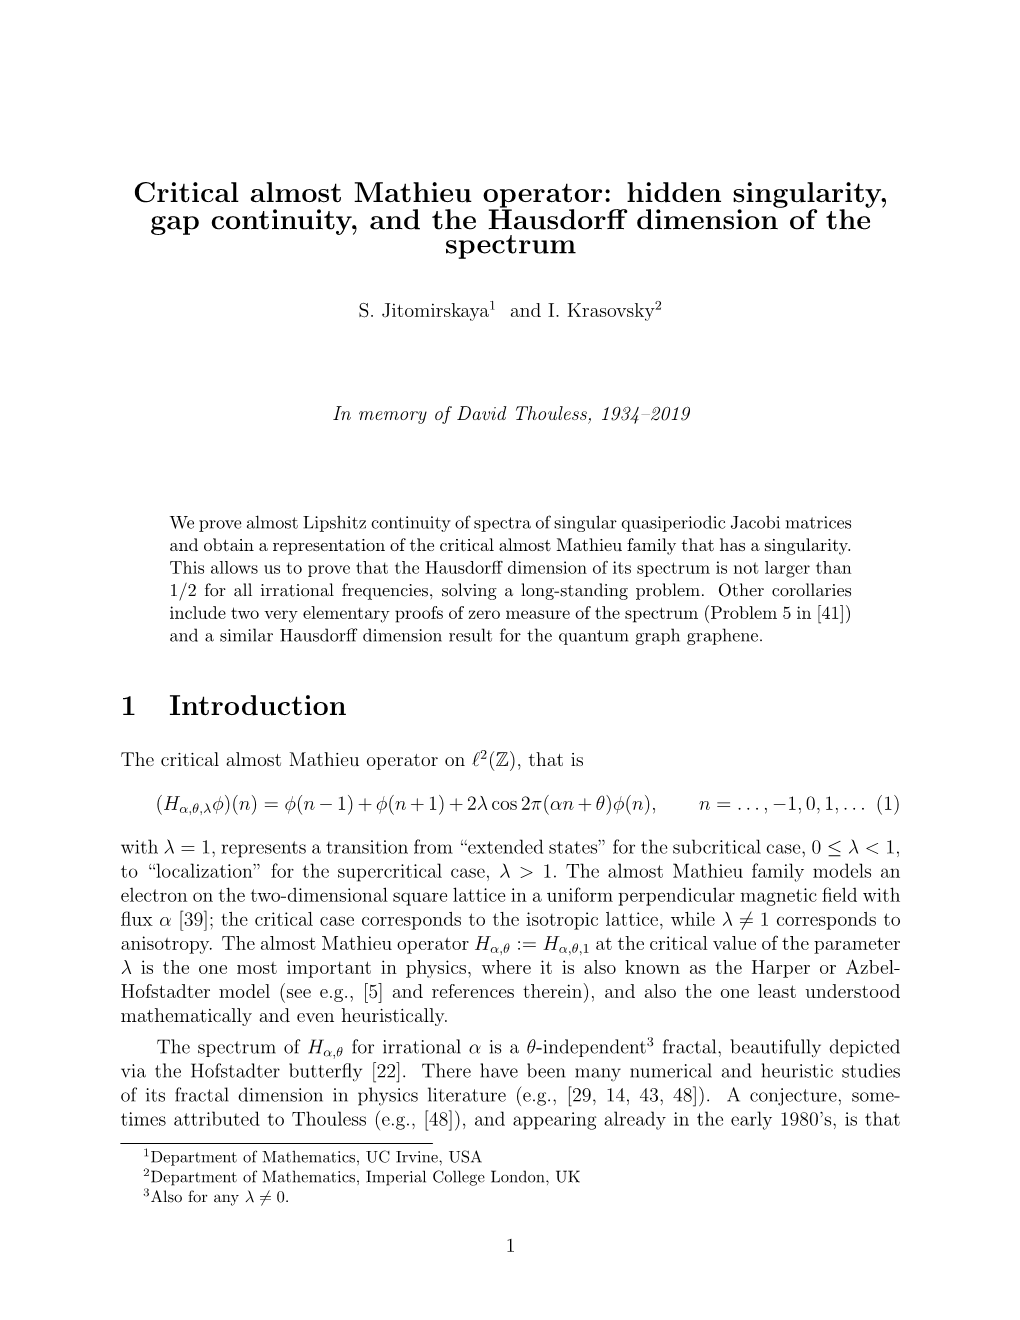 Critical Almost Mathieu Operator: Hidden Singularity, Gap Continuity, and the Hausdorﬀ Dimension of the Spectrum